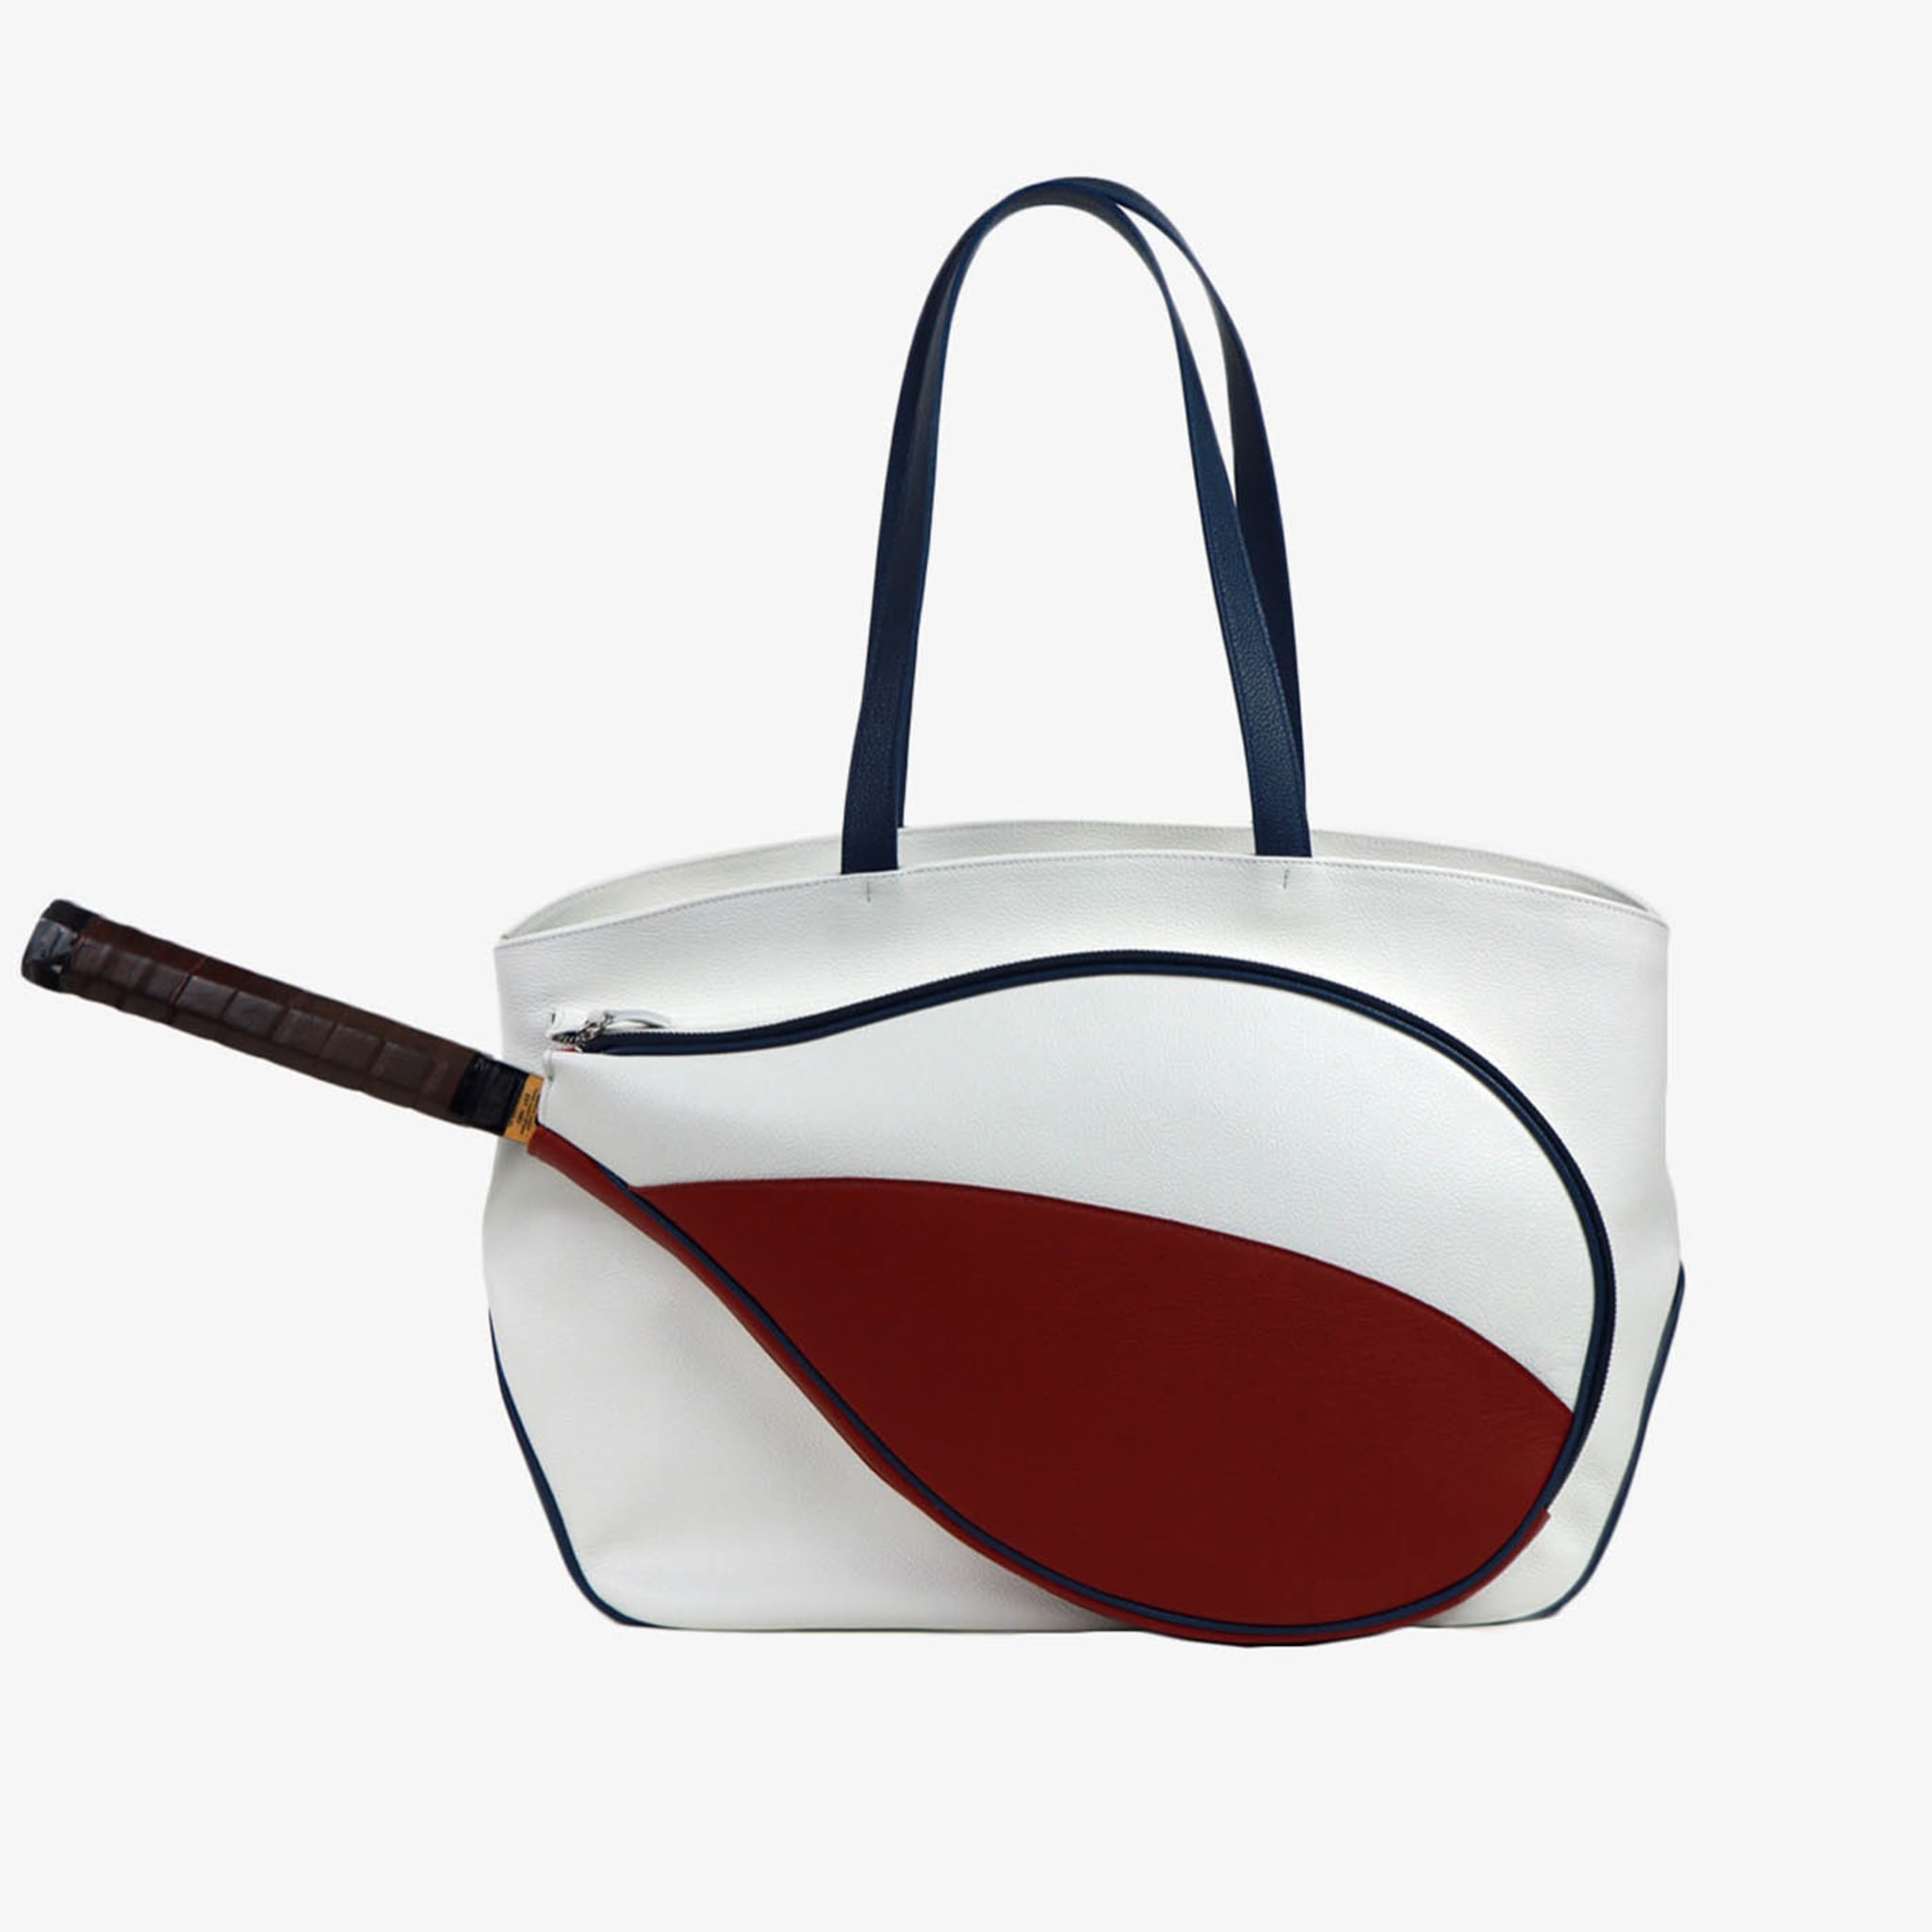 Sport White/Red/Blue Bag with Tennis-Racket-Shaped Pocket - Alternative view 3